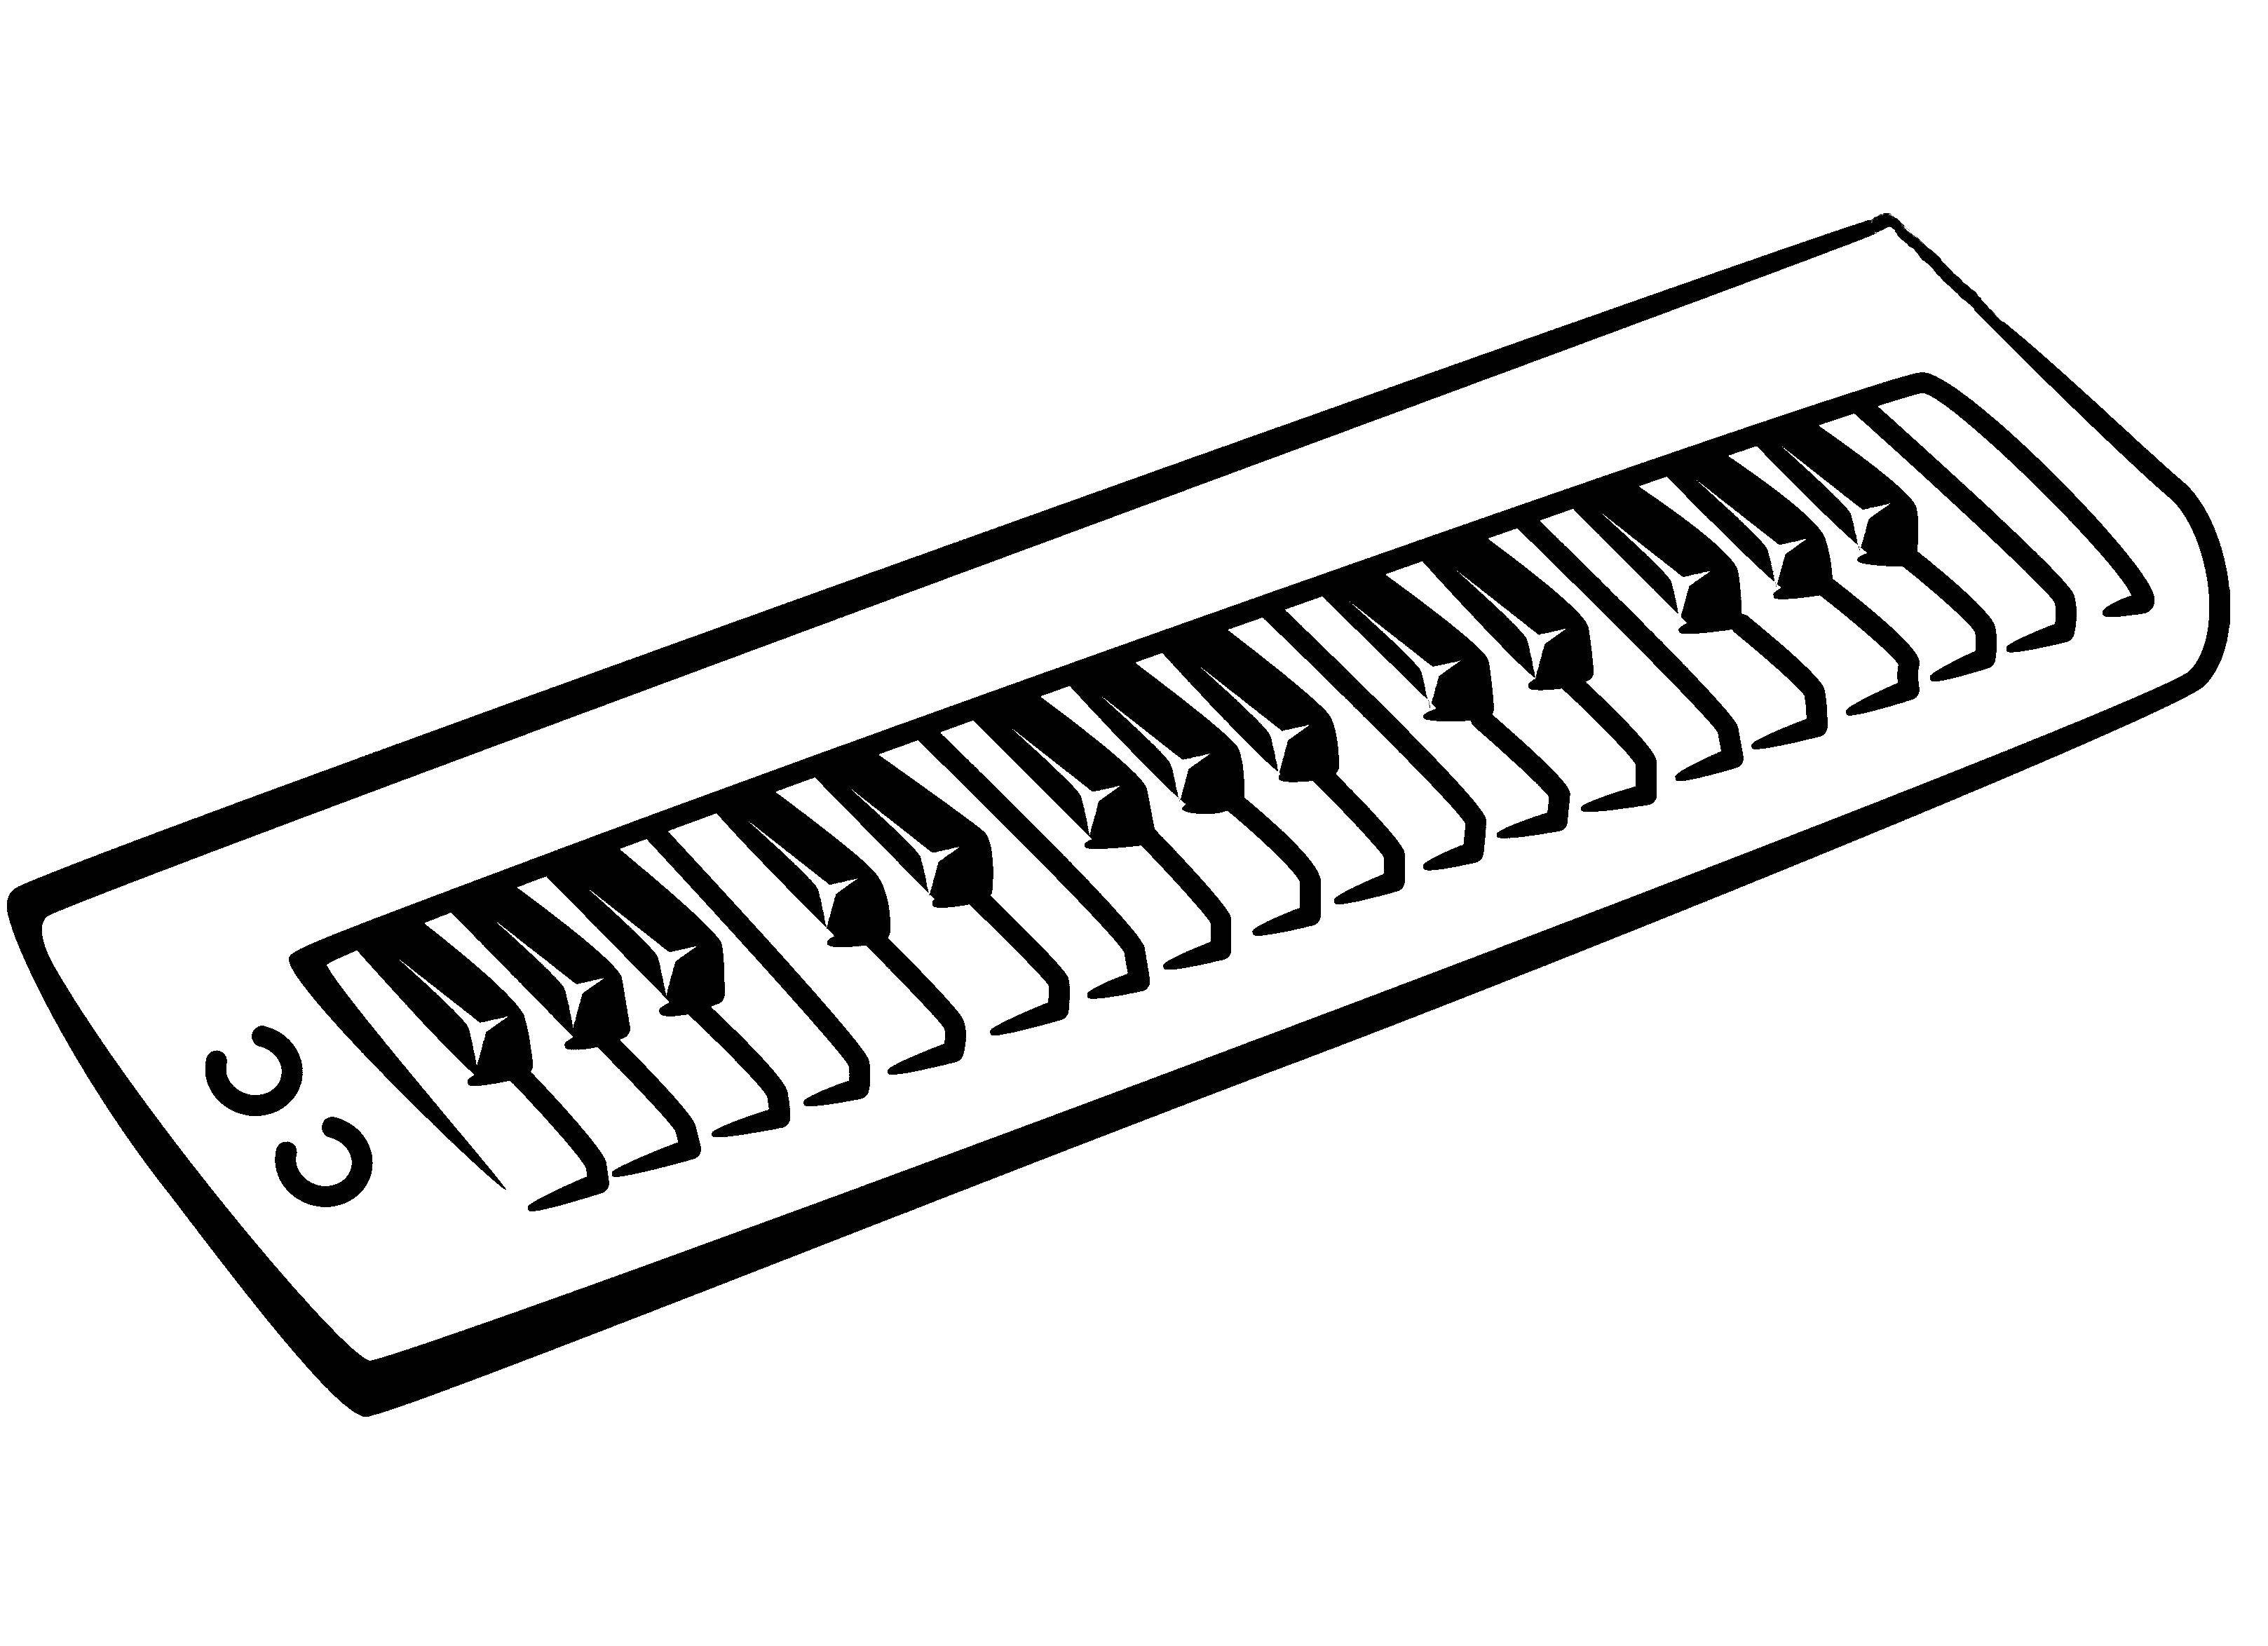 Coloring Cifrovoe piano. Category Musical instrument. Tags:  piano.